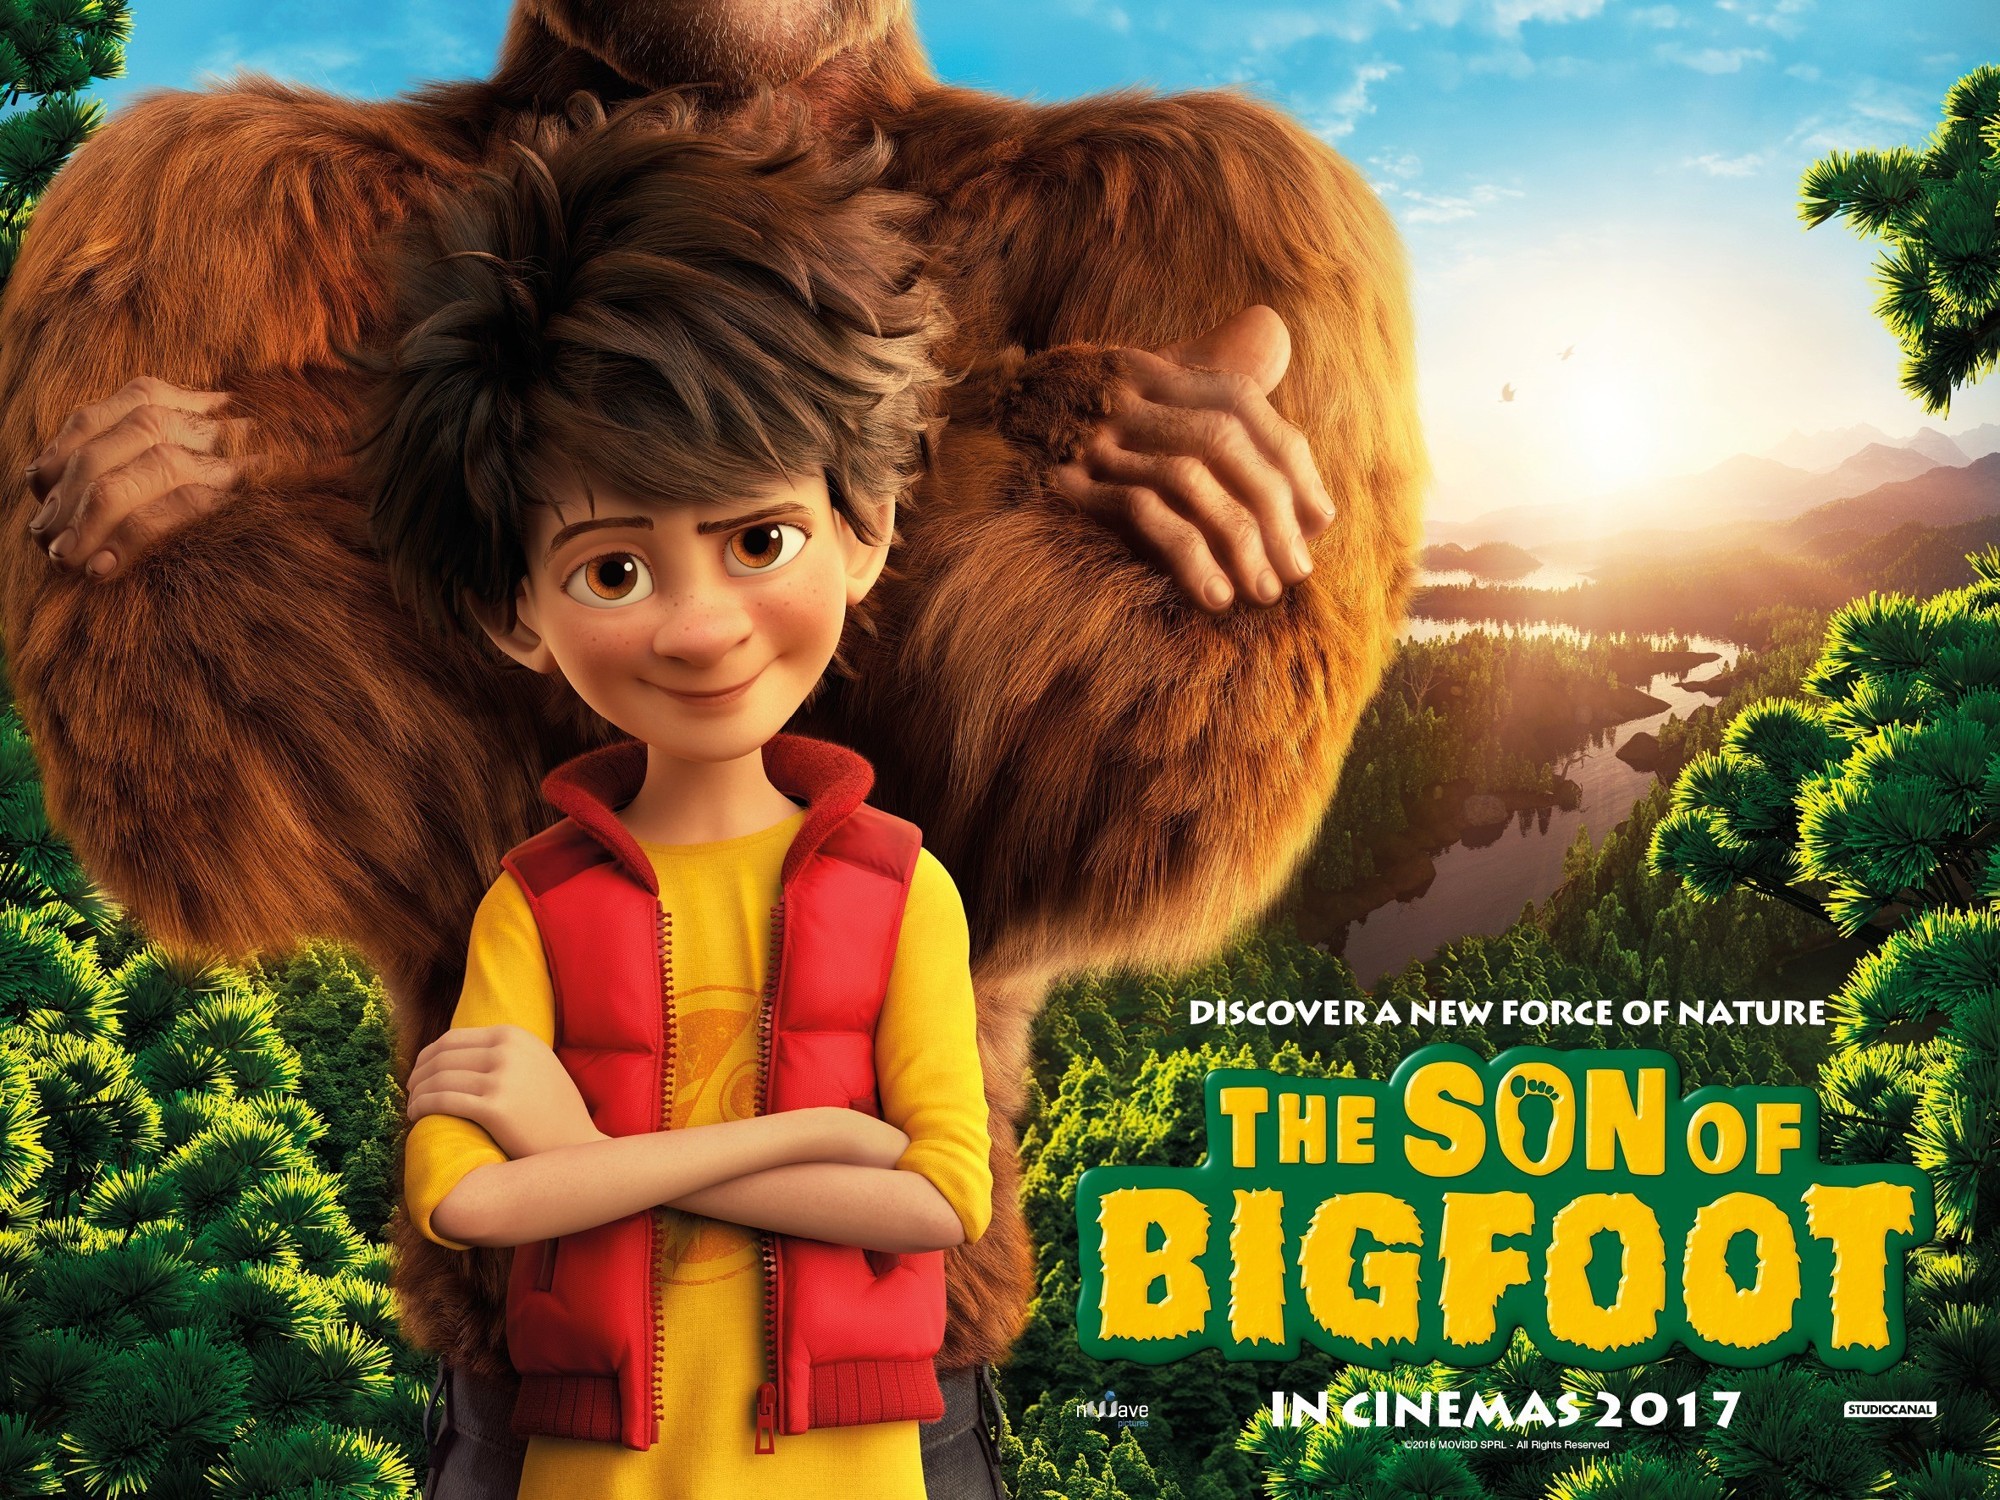 The Son of Bigfoot (2018) Pictures, Trailer, Reviews, News, DVD and Soundtrack